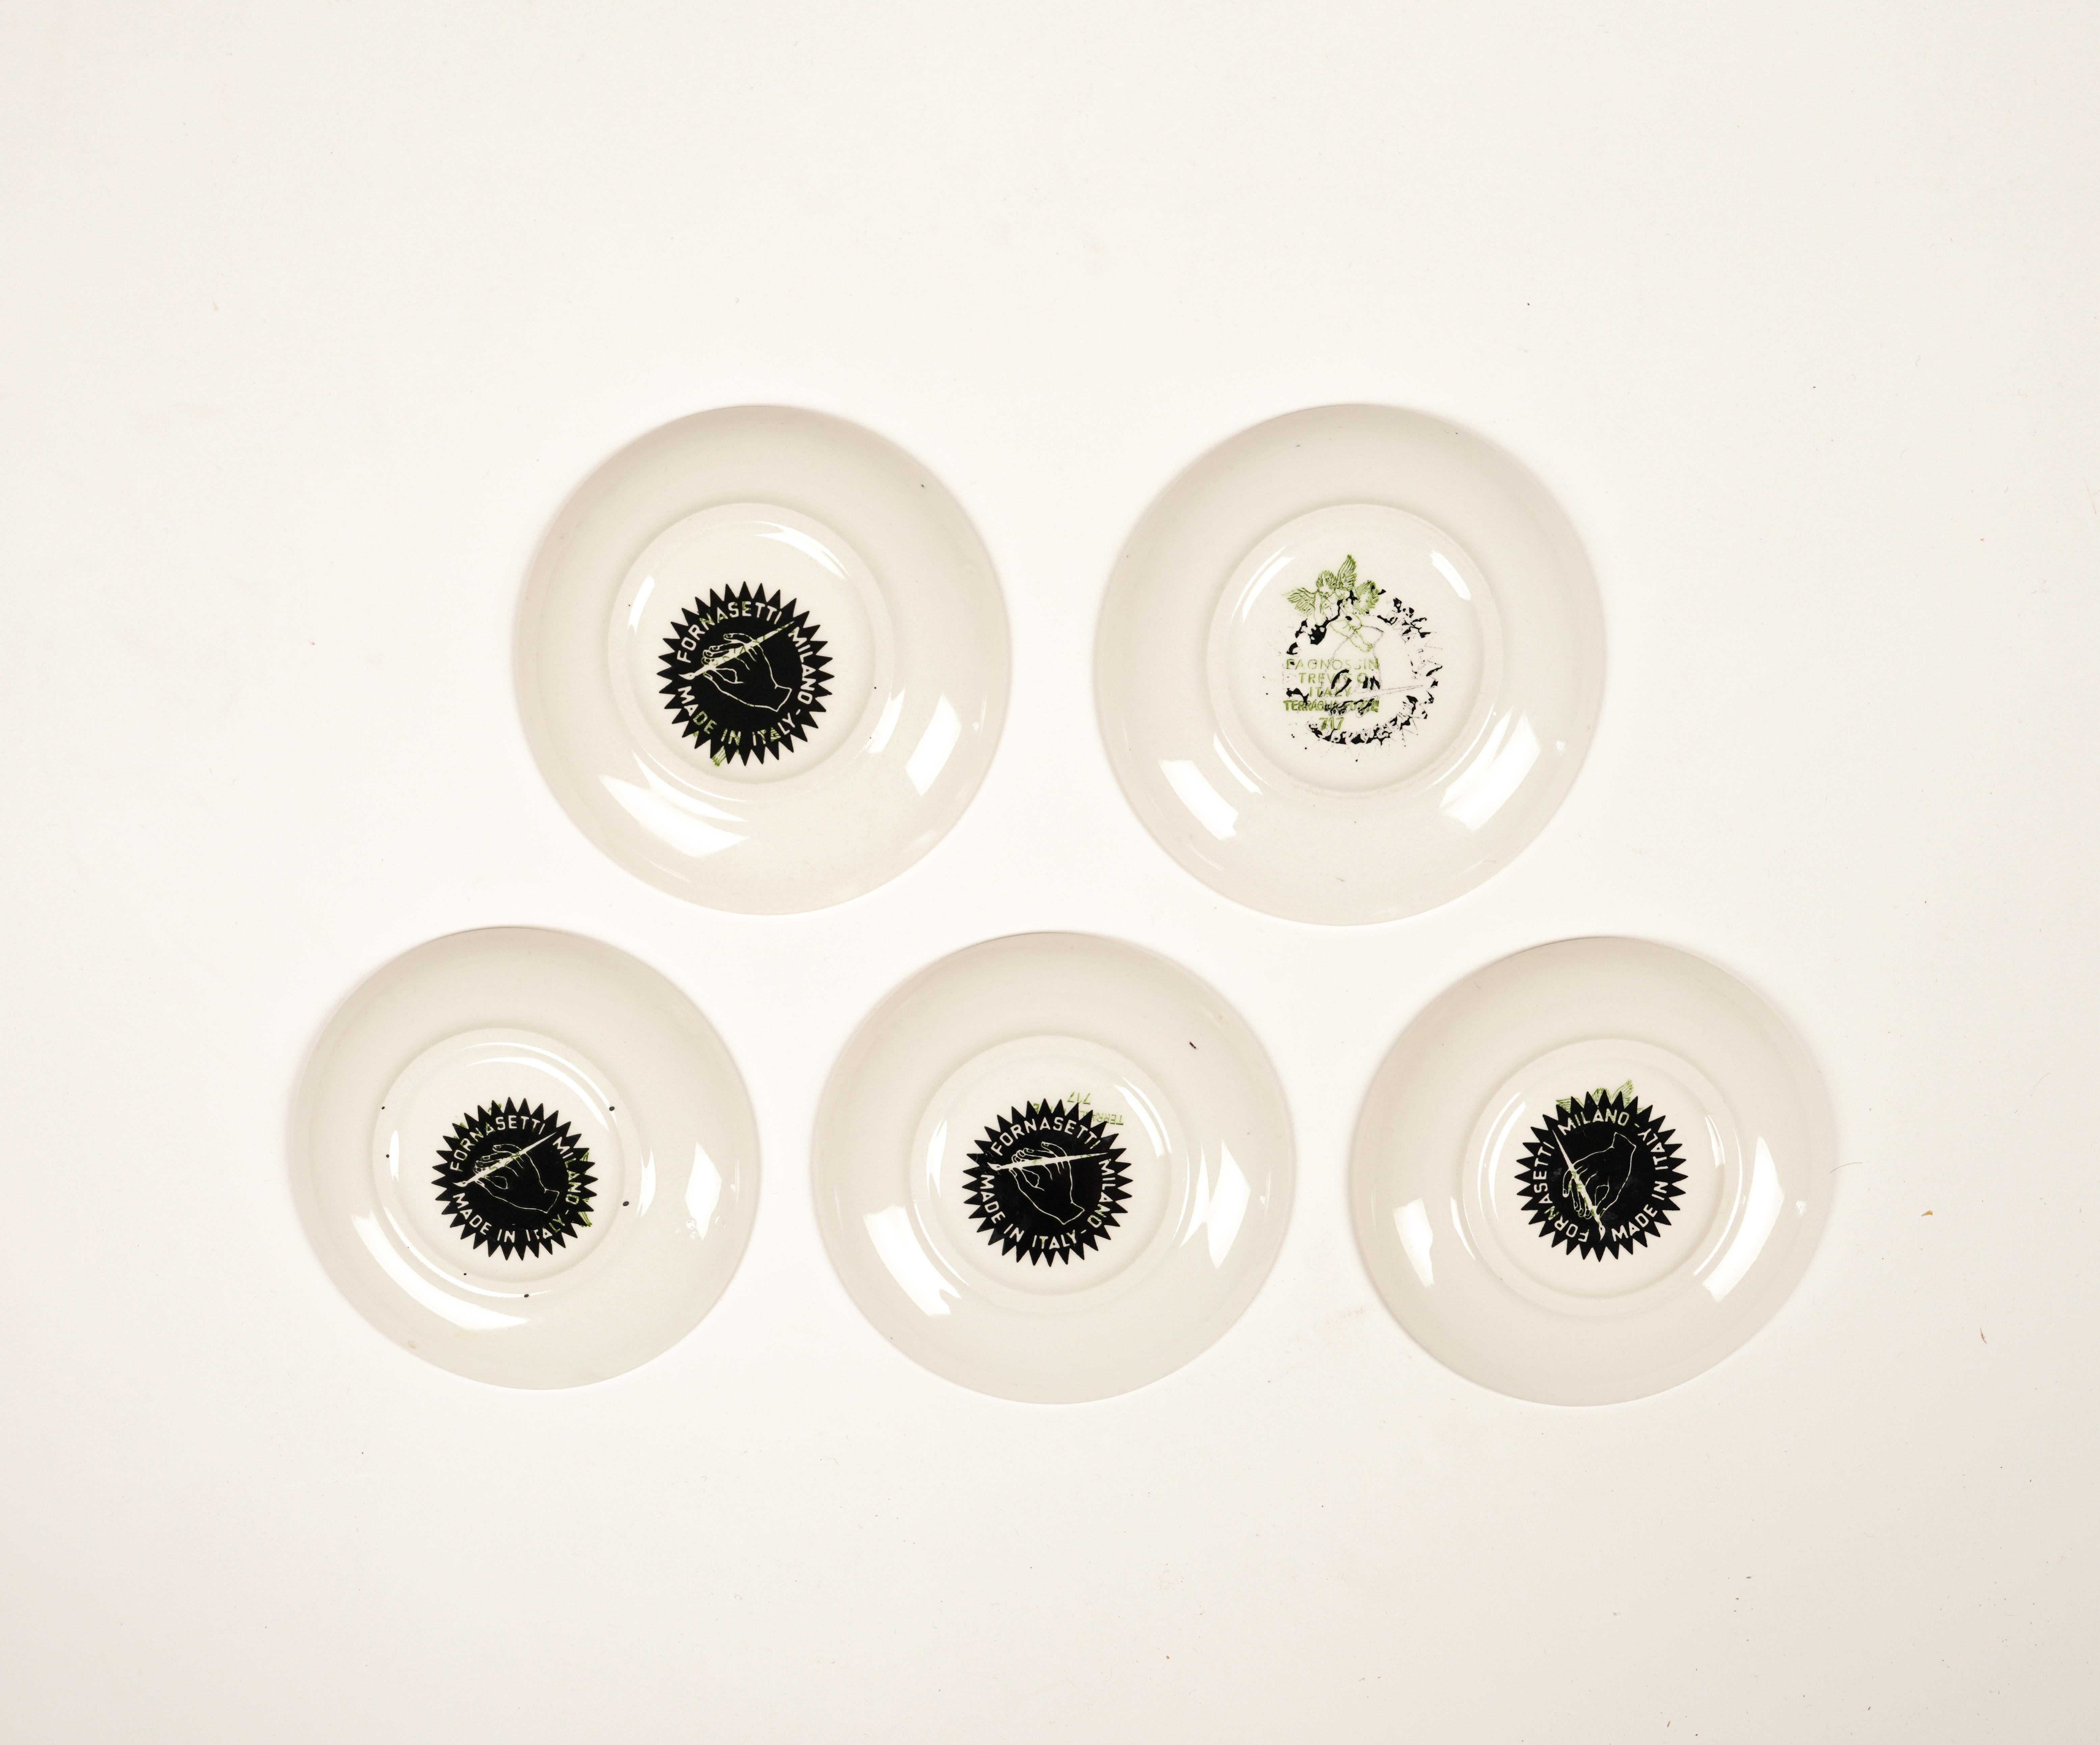 Set of 5 Small Plate or Coasters in Porcelain by Piero Fornasetti, Italy 1950s For Sale 6